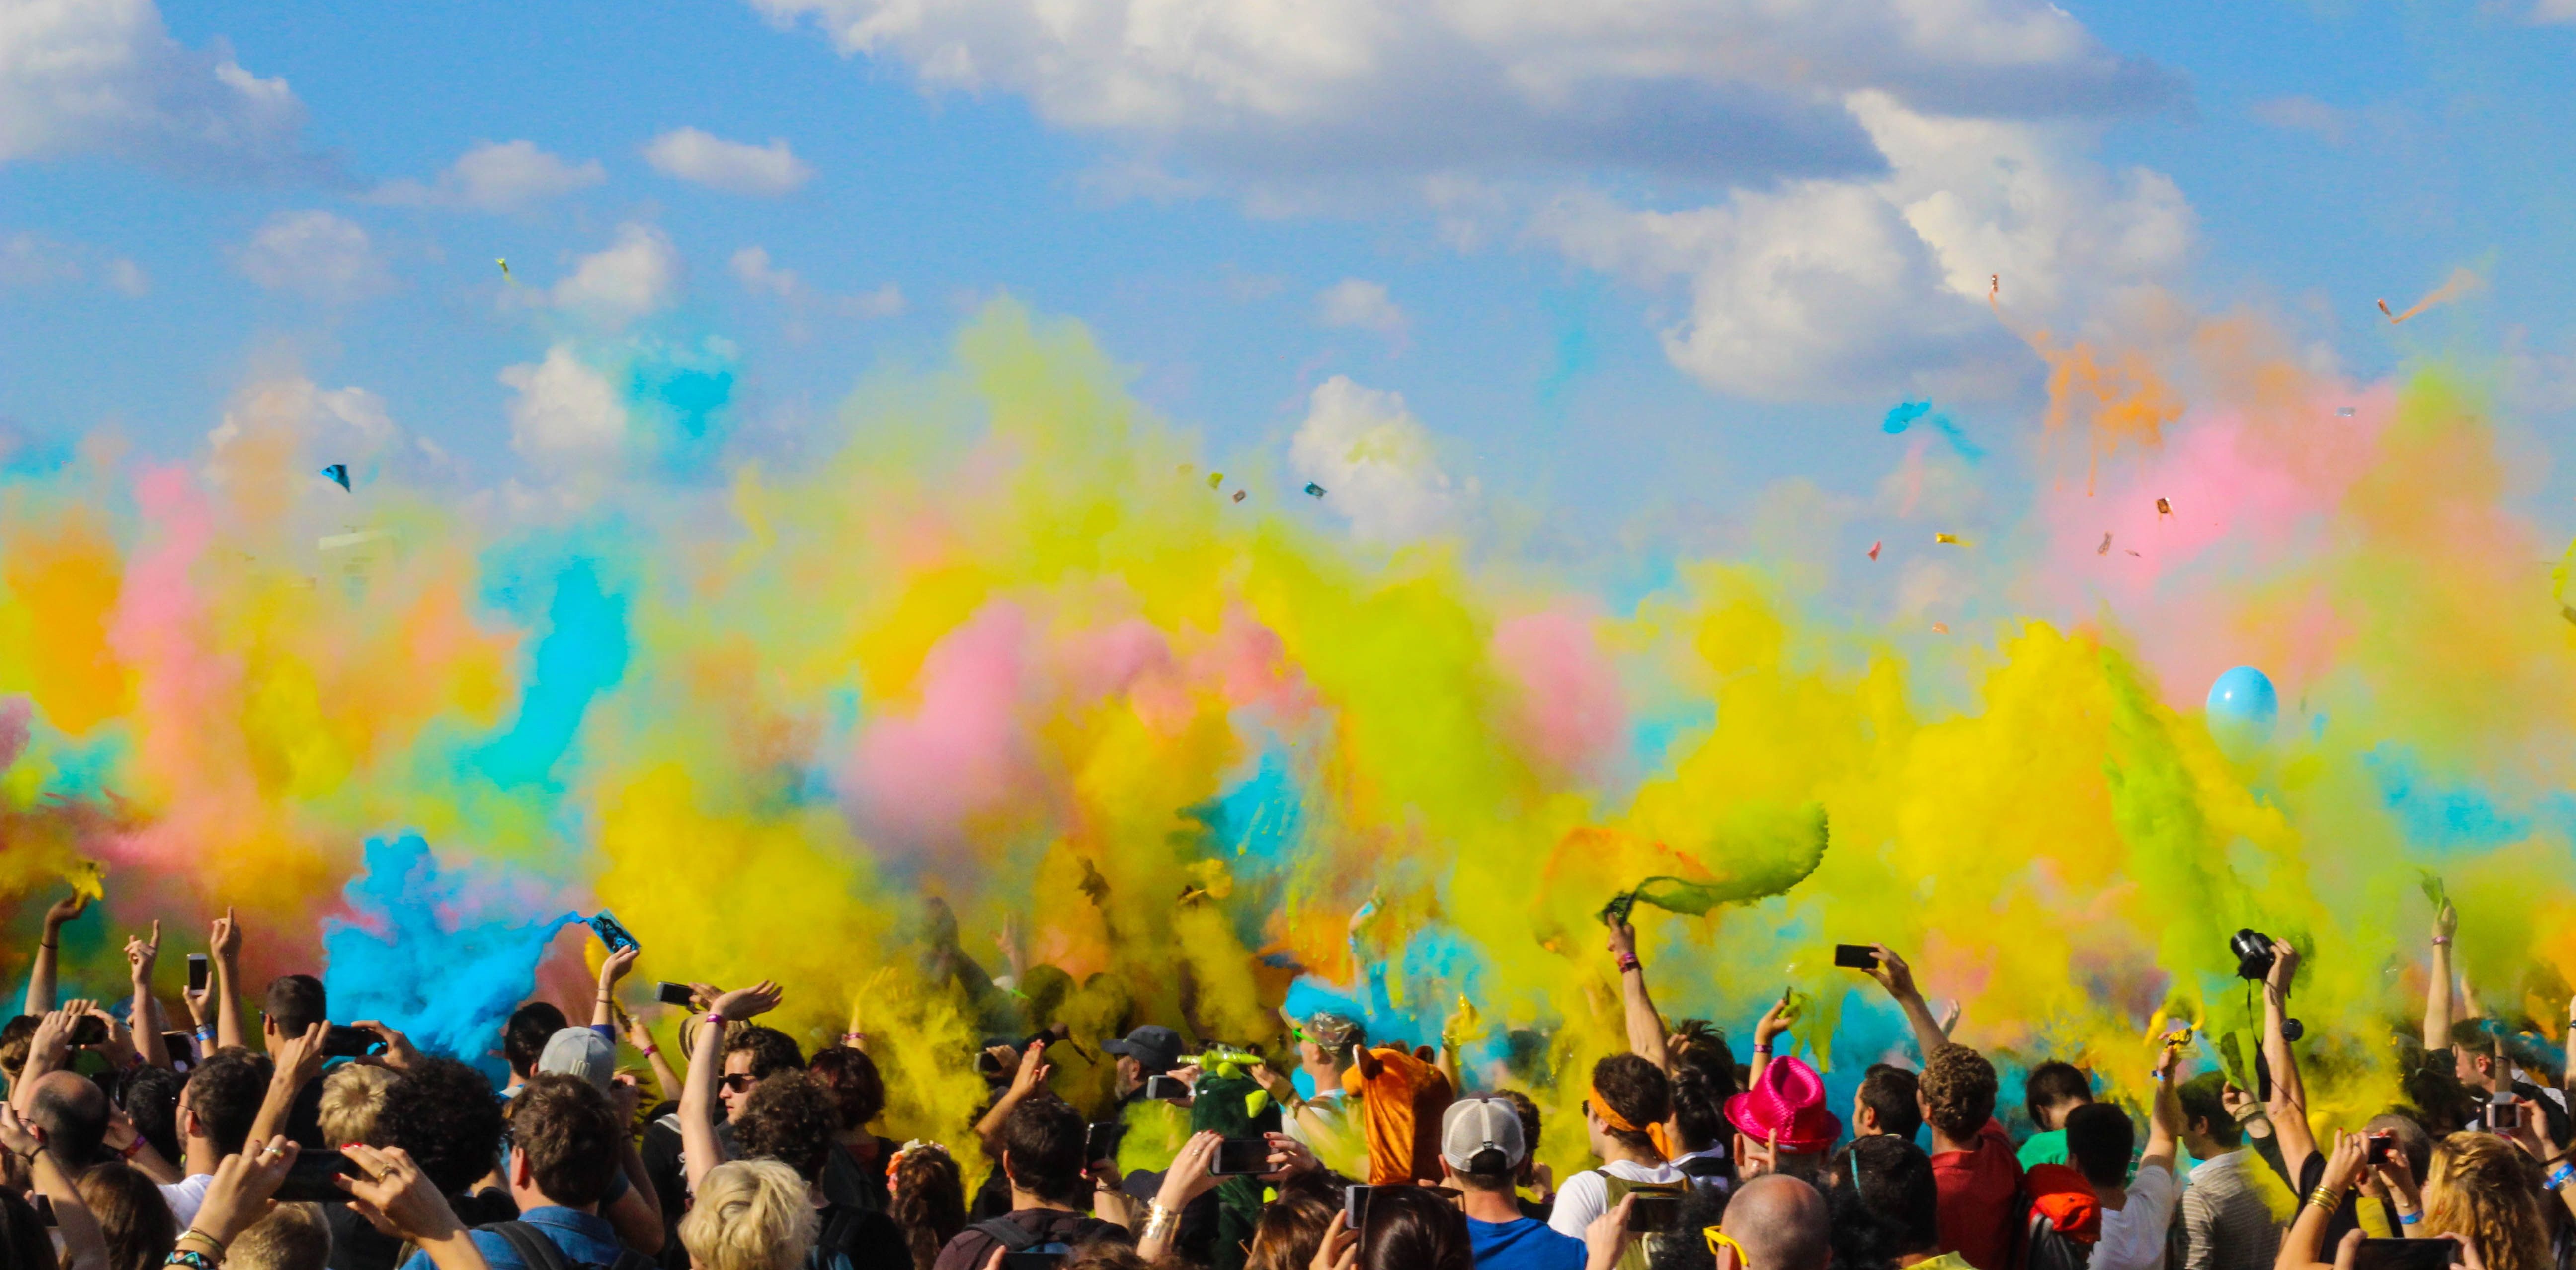 5184x2556 colorful, person, group, yellow, blue, indium, wallpaper, colour run, summer background, festival, traditional, summer wallpaper, colour, powder, party, color, celebration, crowd, holi, Free picture, summer